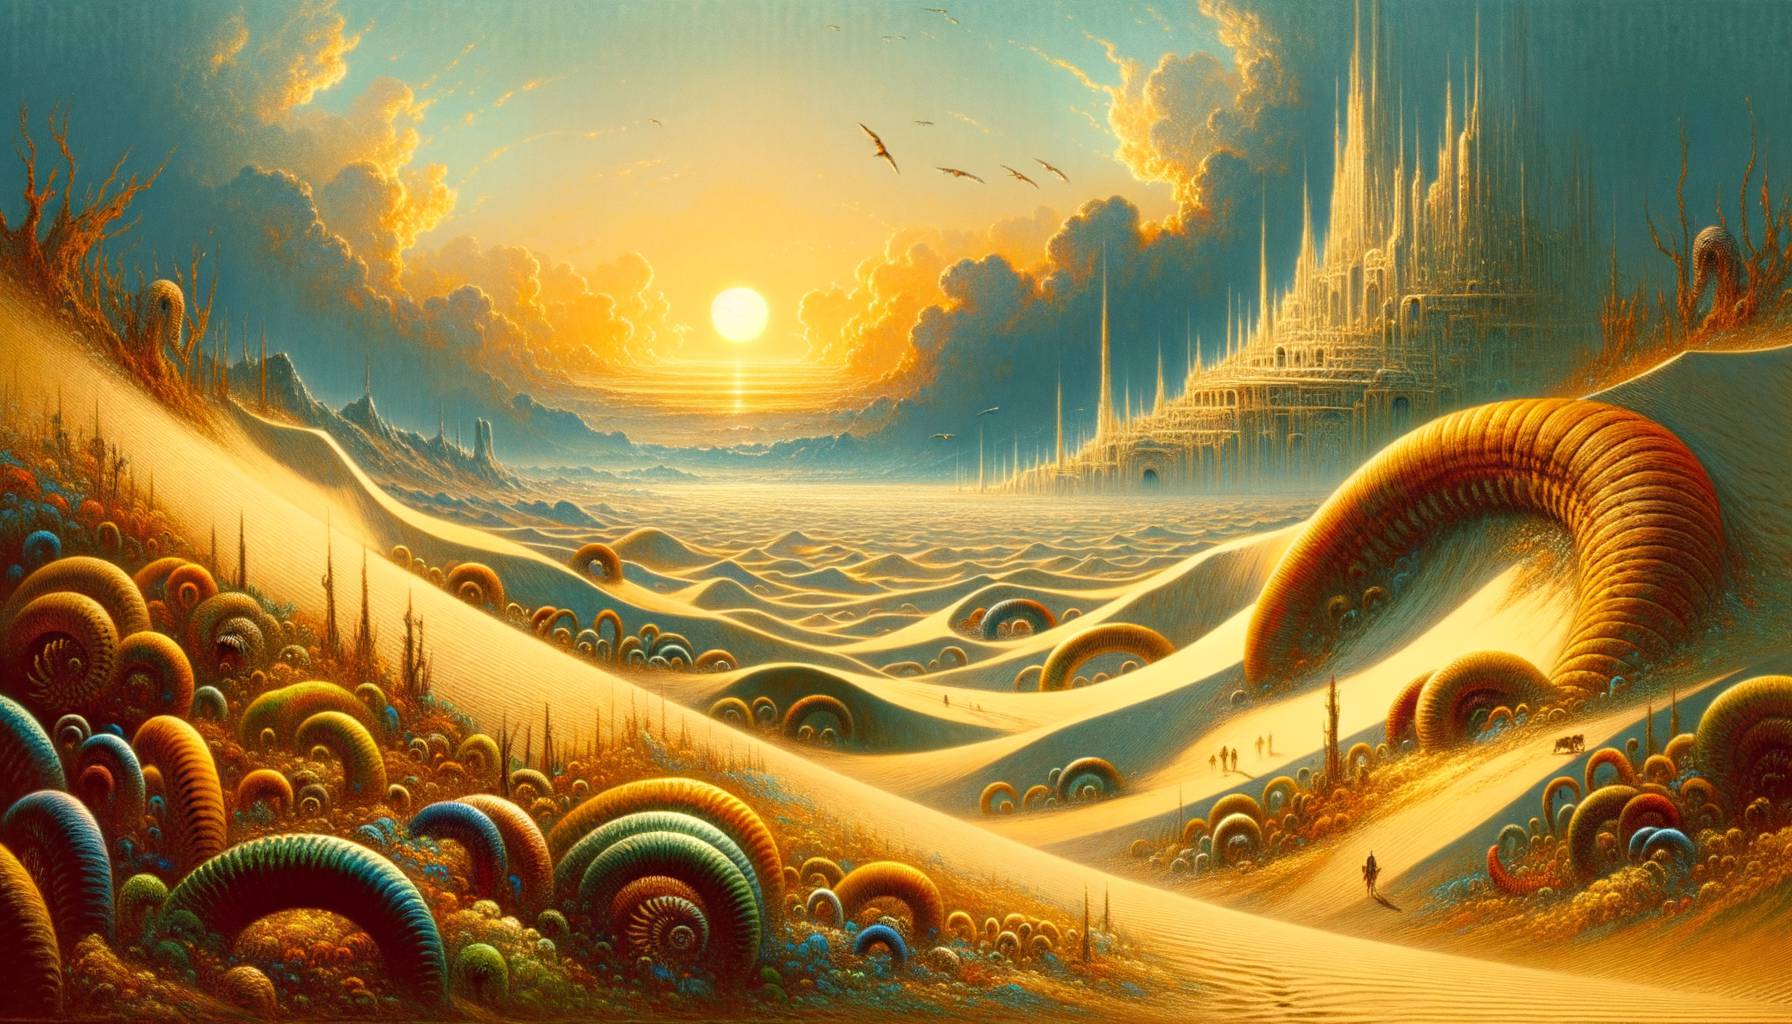 Ecology and Empire: The Complex World of Frank Herbert's Dune